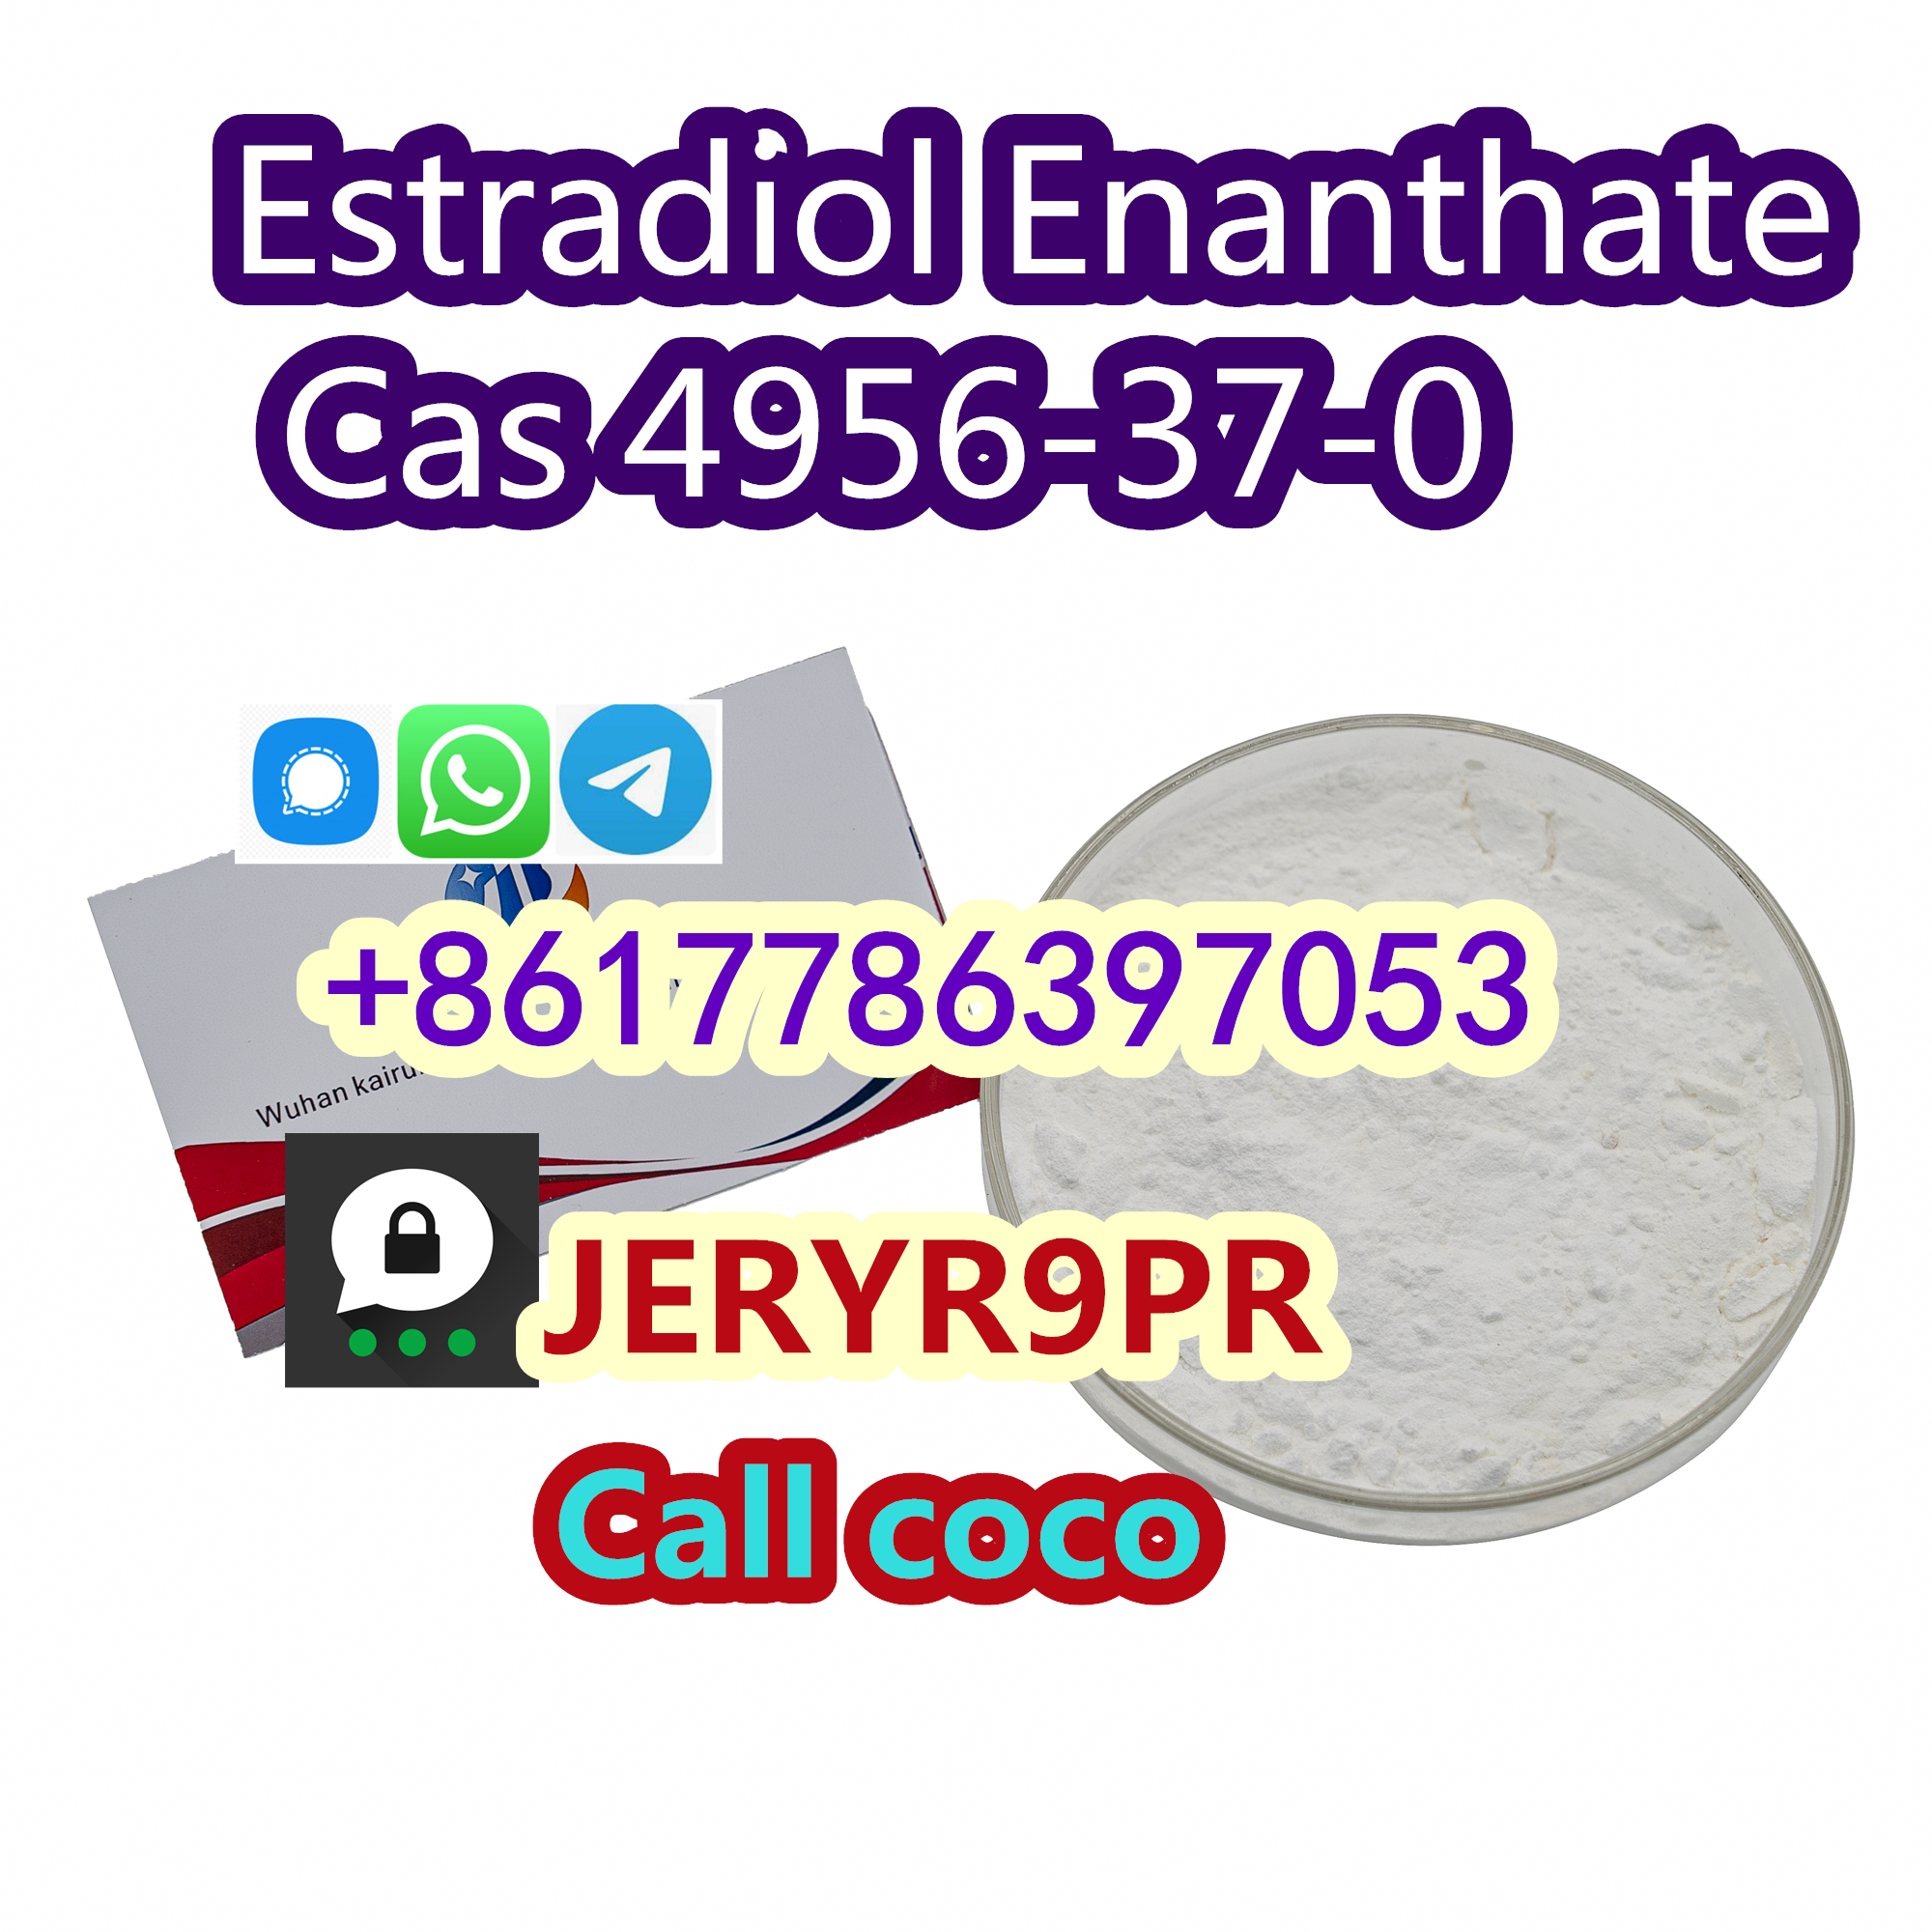 Estradiol Enanthate Cas 4956-37-0 Factory Wholesale Price,Wuhan,Others,Free Classifieds,Post Free Ads,77traders.com